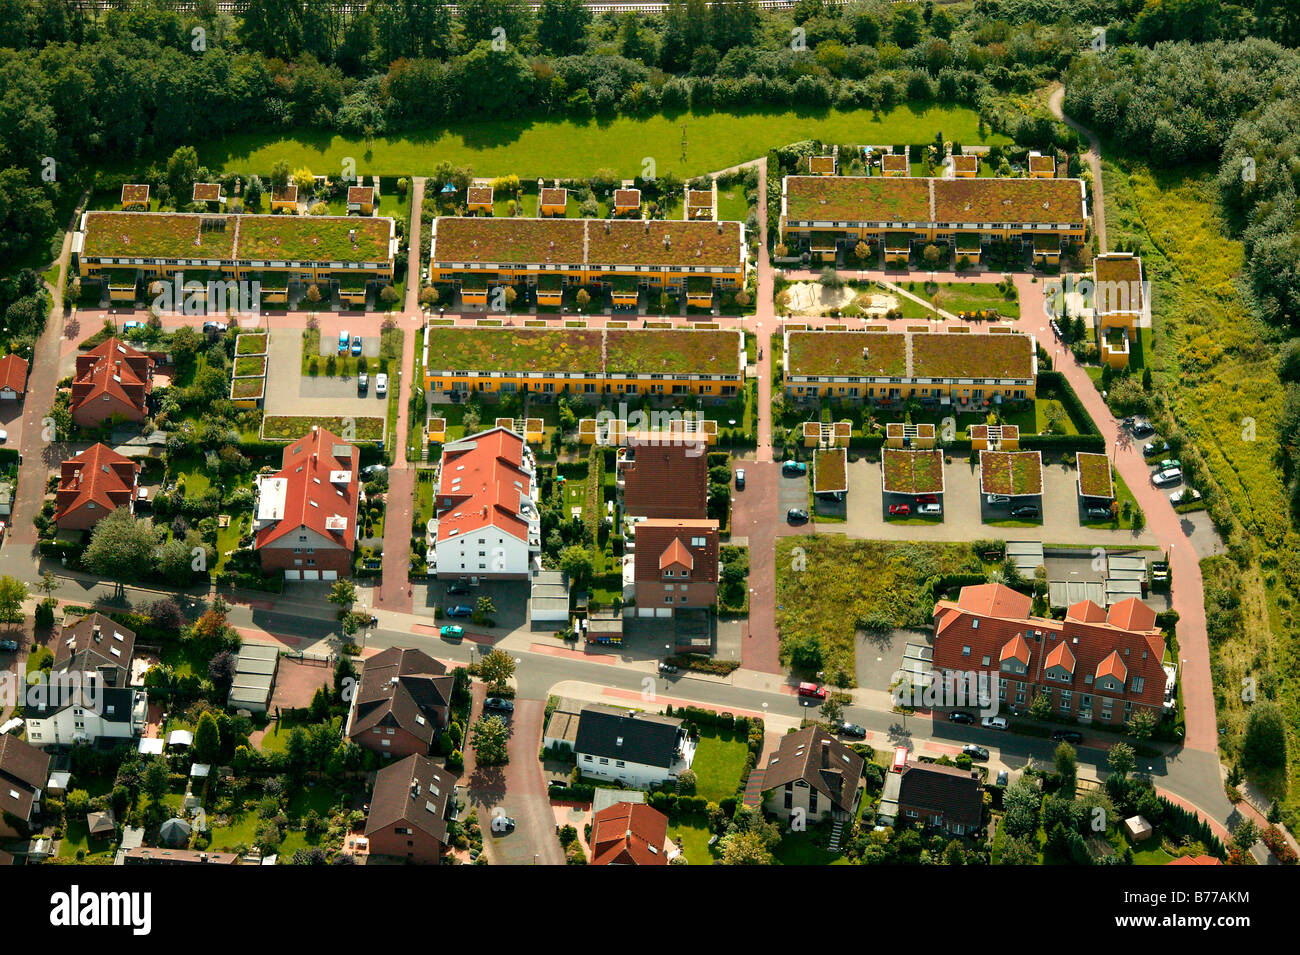 Aerial photograph, ecological housing on the Sandkuhle, Recklinghausen, Ruhr district, North Rhine-Westphalia, Germany, Europe Stock Photo